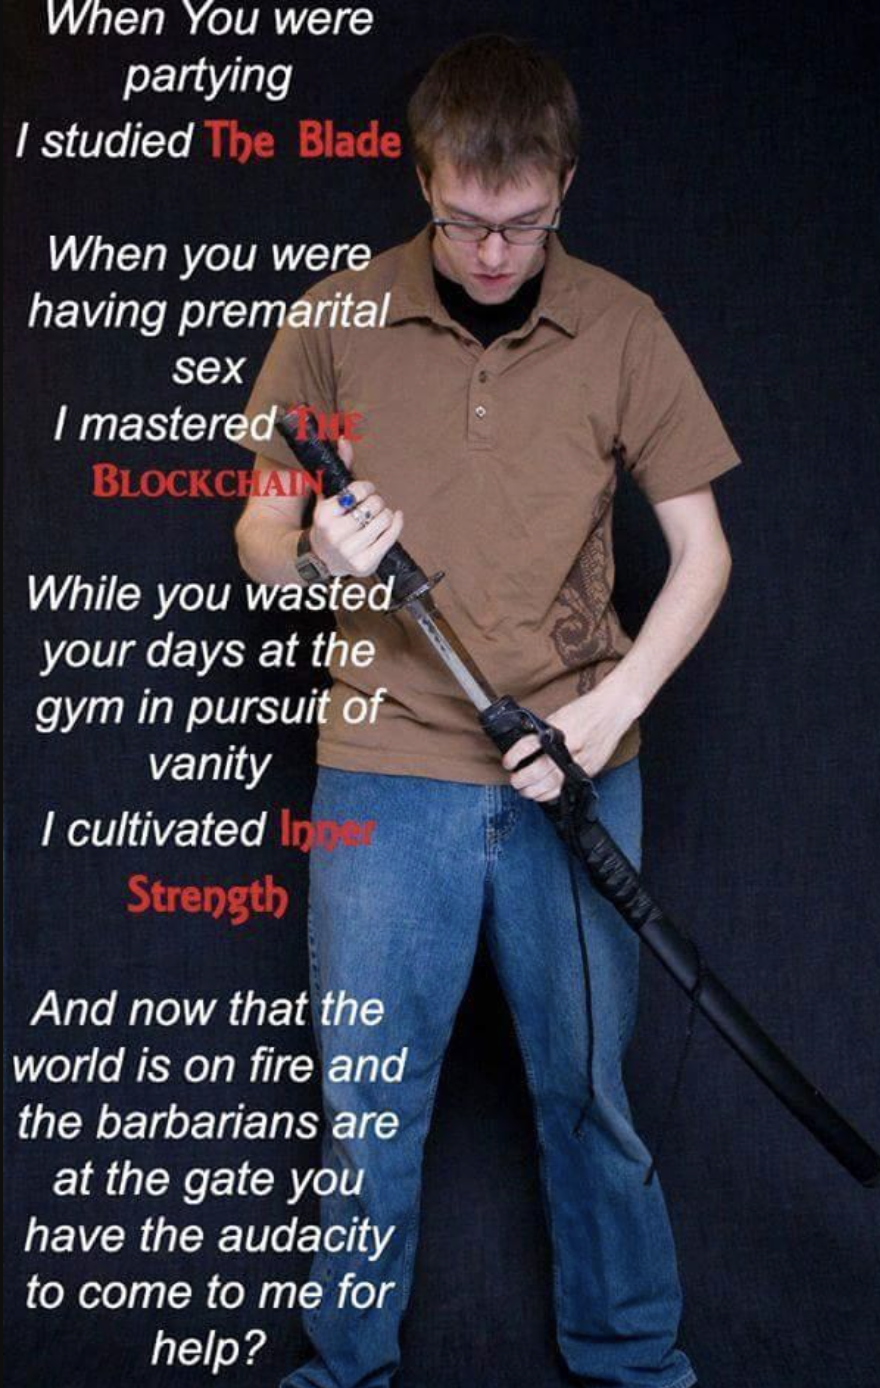 now you come to me for help - When You were partying I studied The Blade When you were having premarital sex I mastered Blockchain While you wasted your days at the gym in pursuit of vanity I cultivated In Strength And now that the world is on fire and th